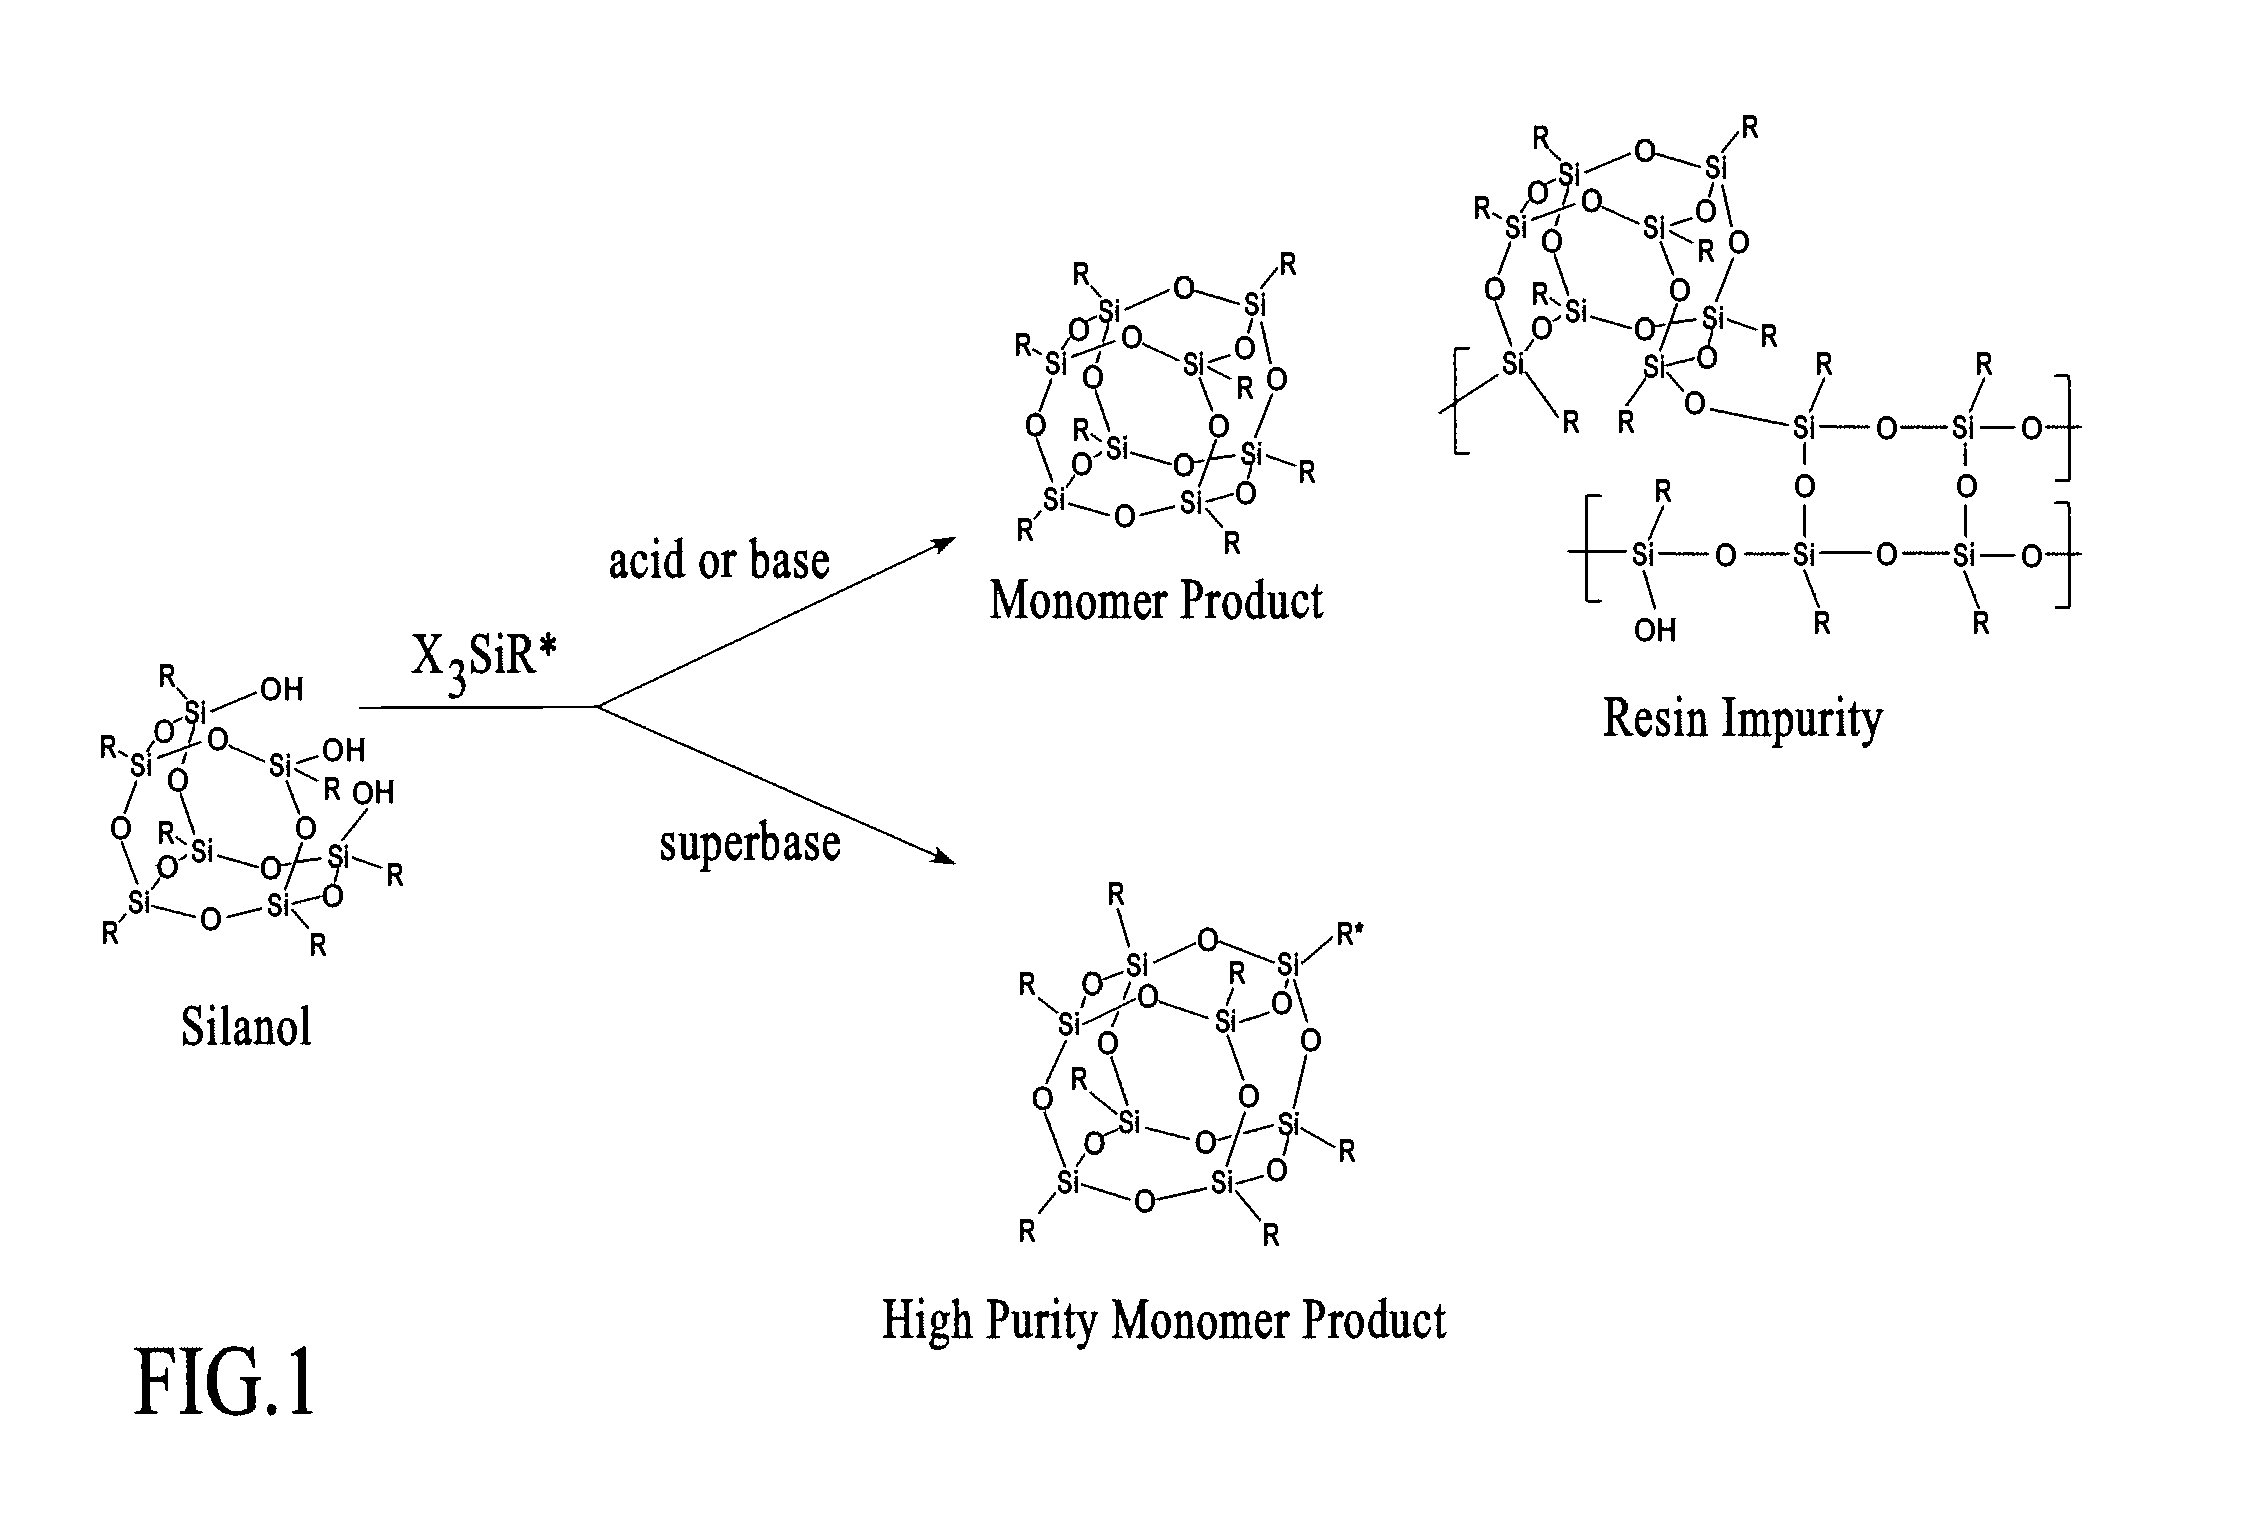 Process for assembly of POSS monomers